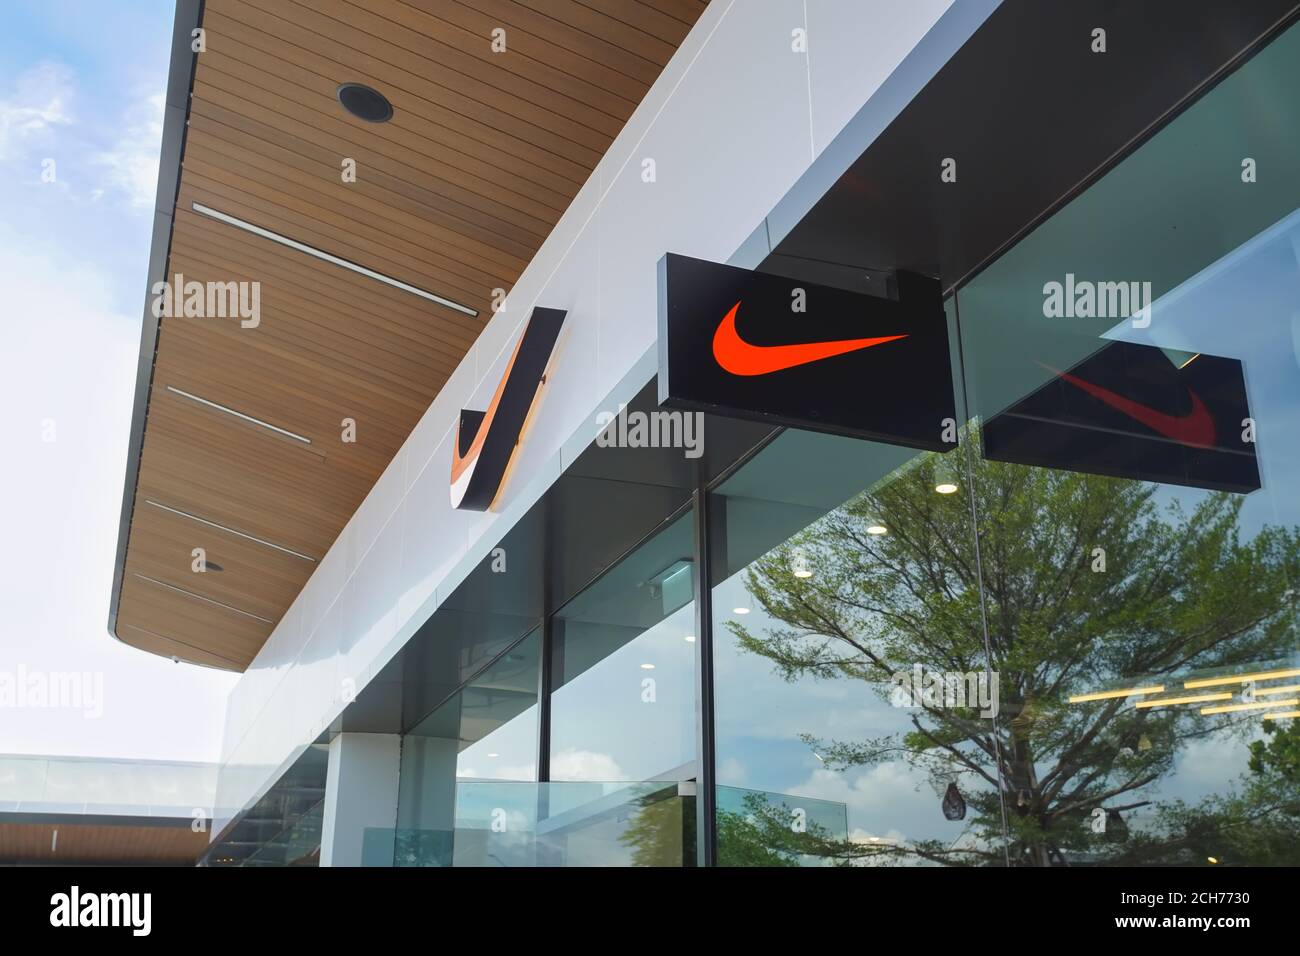 verontreiniging Uiterlijk Welsprekend Samut Prakan, Thailand - July 28, 2020: Nike shop in Siam Premium Outlets  Bangkok. Nike is one of the biggest sport manufacturing company in the  world Stock Photo - Alamy